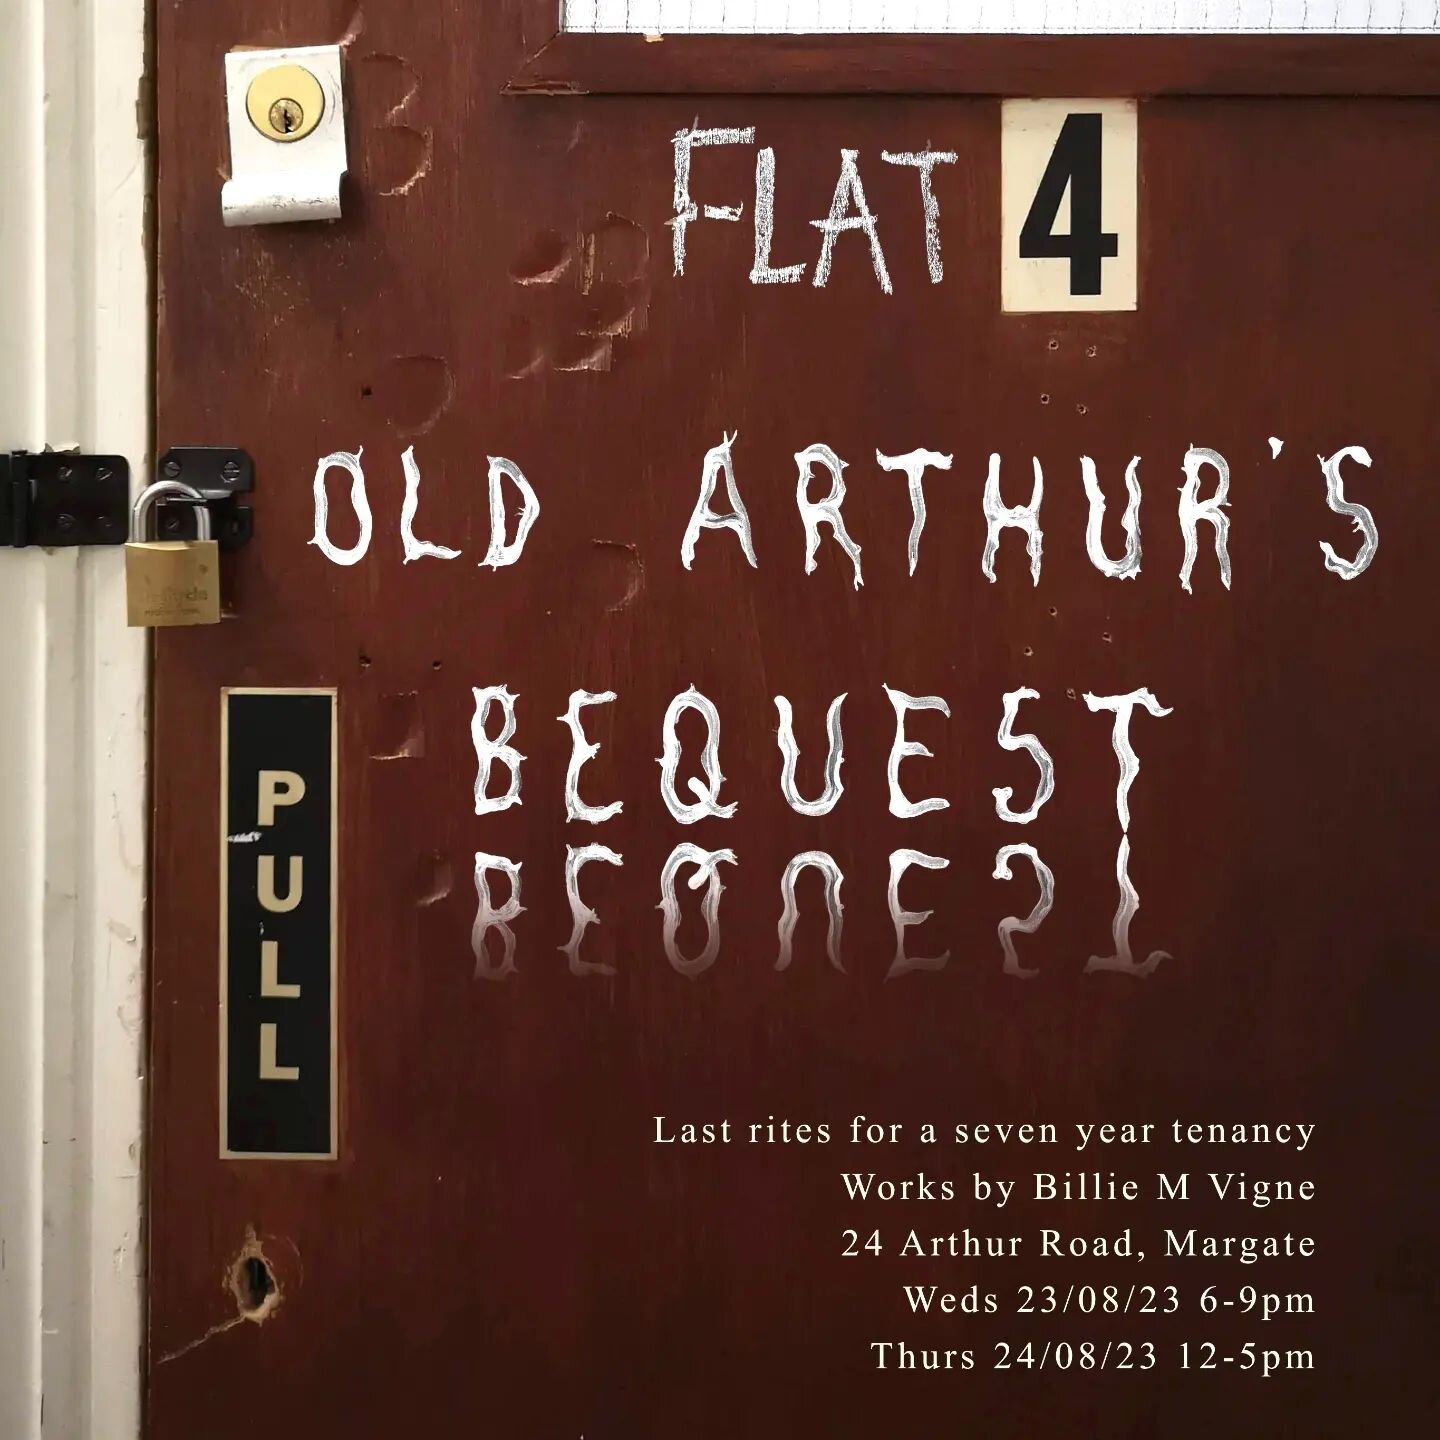 Flat 4 - Old Arthur's Bequest
Weds 23rd August 6-9pm
Thurs 24th August 12-5pm
24 Arthur Road

Press buzzer 4 for entry or climb up the rope. If you would like to view the exhibition outside of these times please DM.

A wake for the death of my tenanc